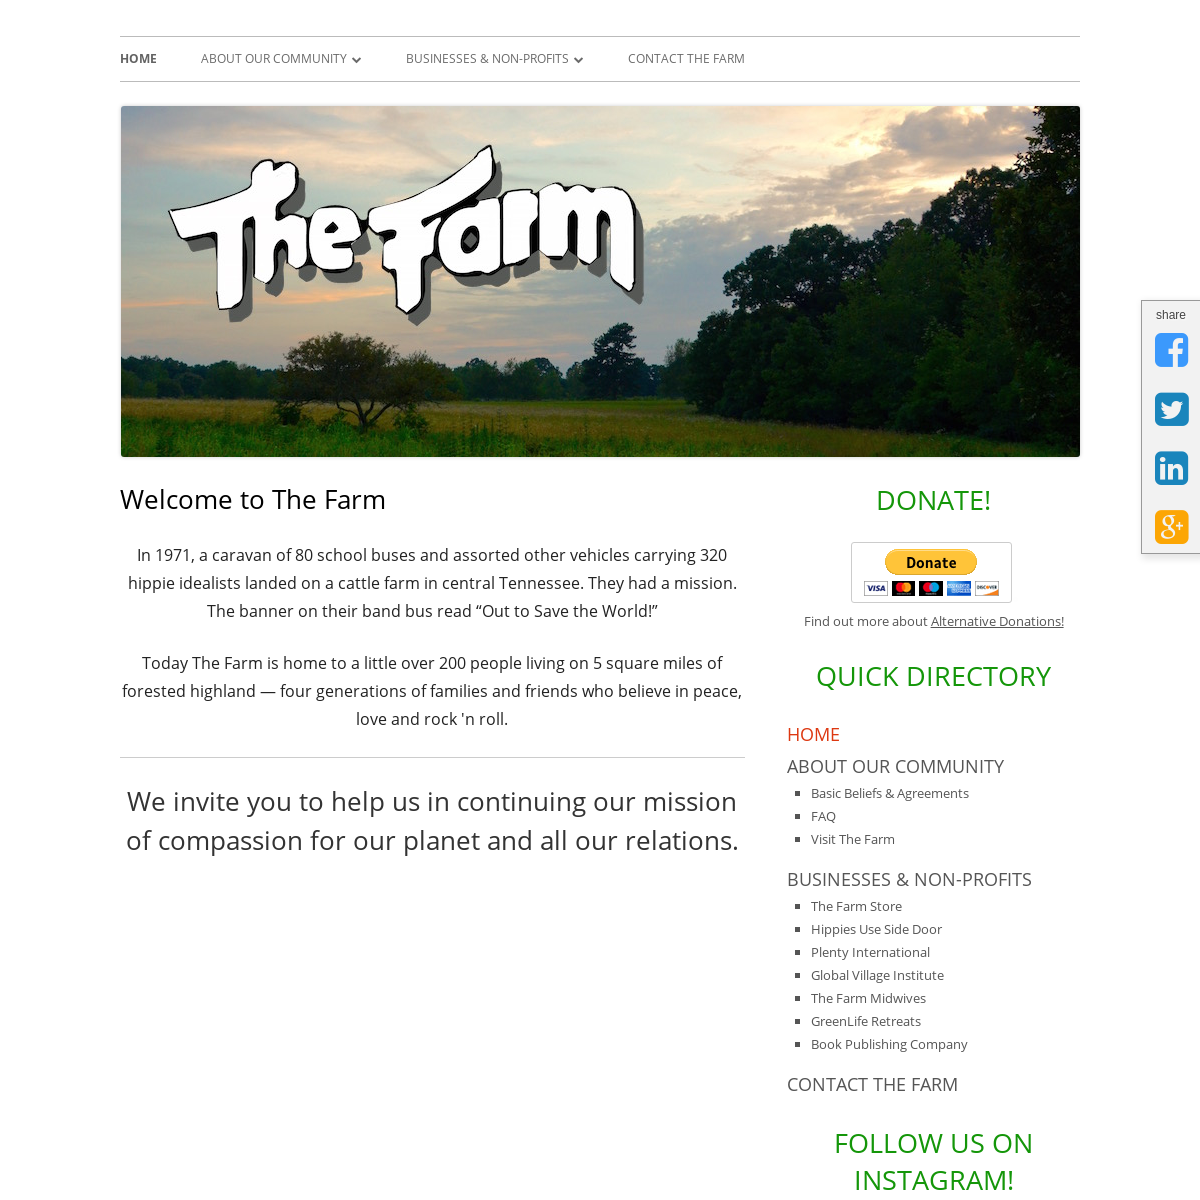 A complete backup of thefarm.org